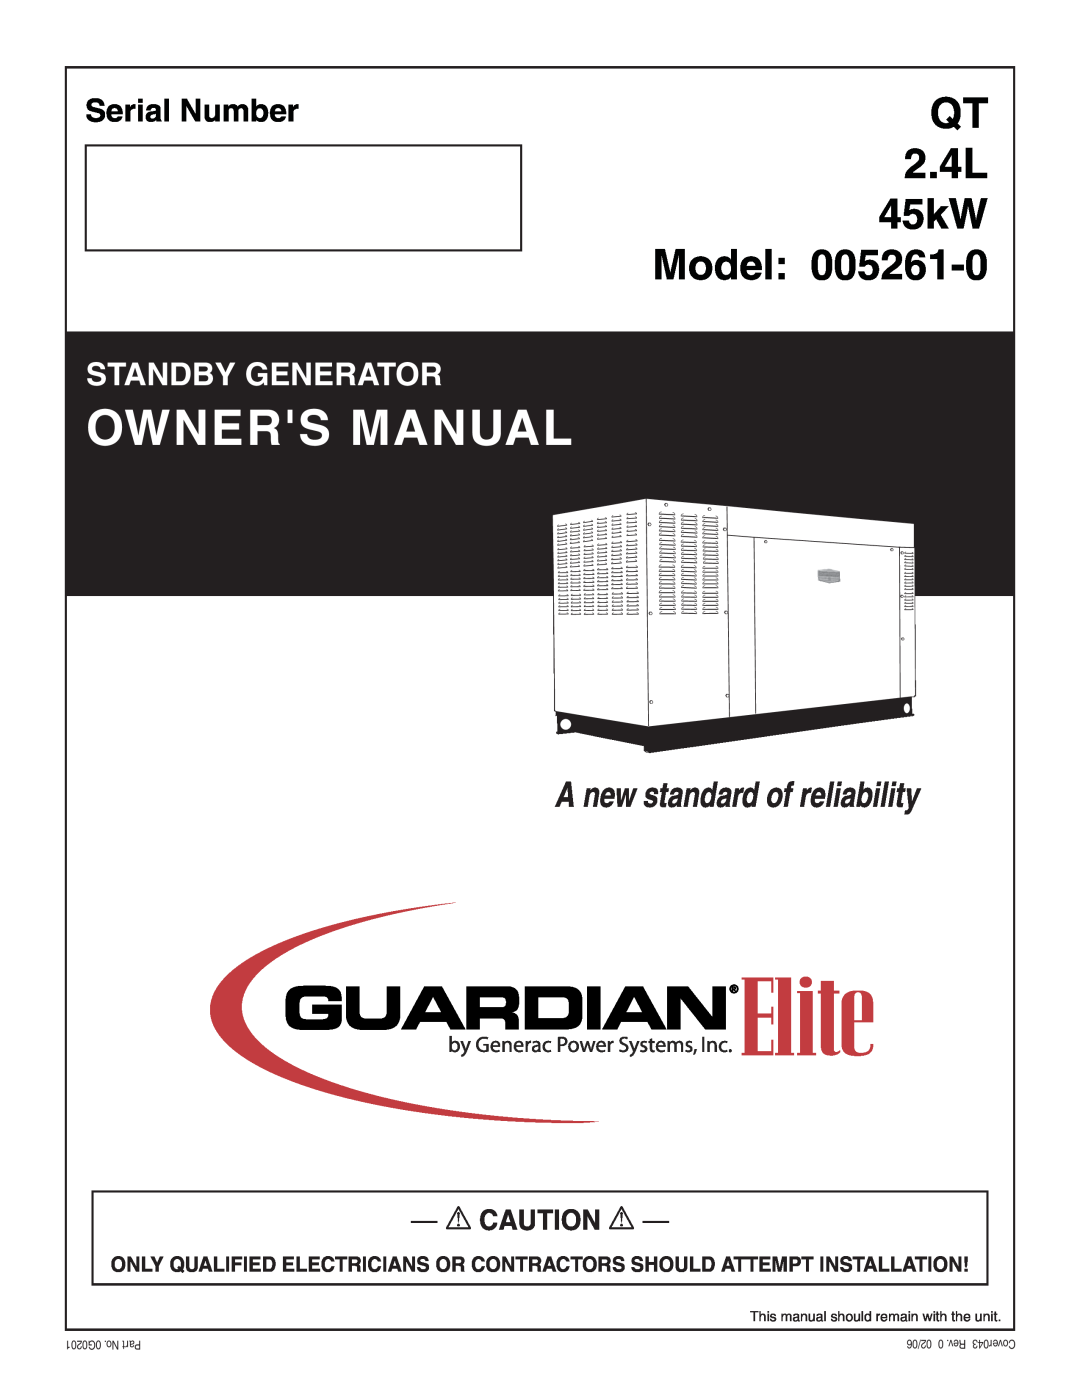 Grandstream Networks 005261-0 owner manual Model, QT 2.4L 45kW, A new standard of reliability, Serial Number 